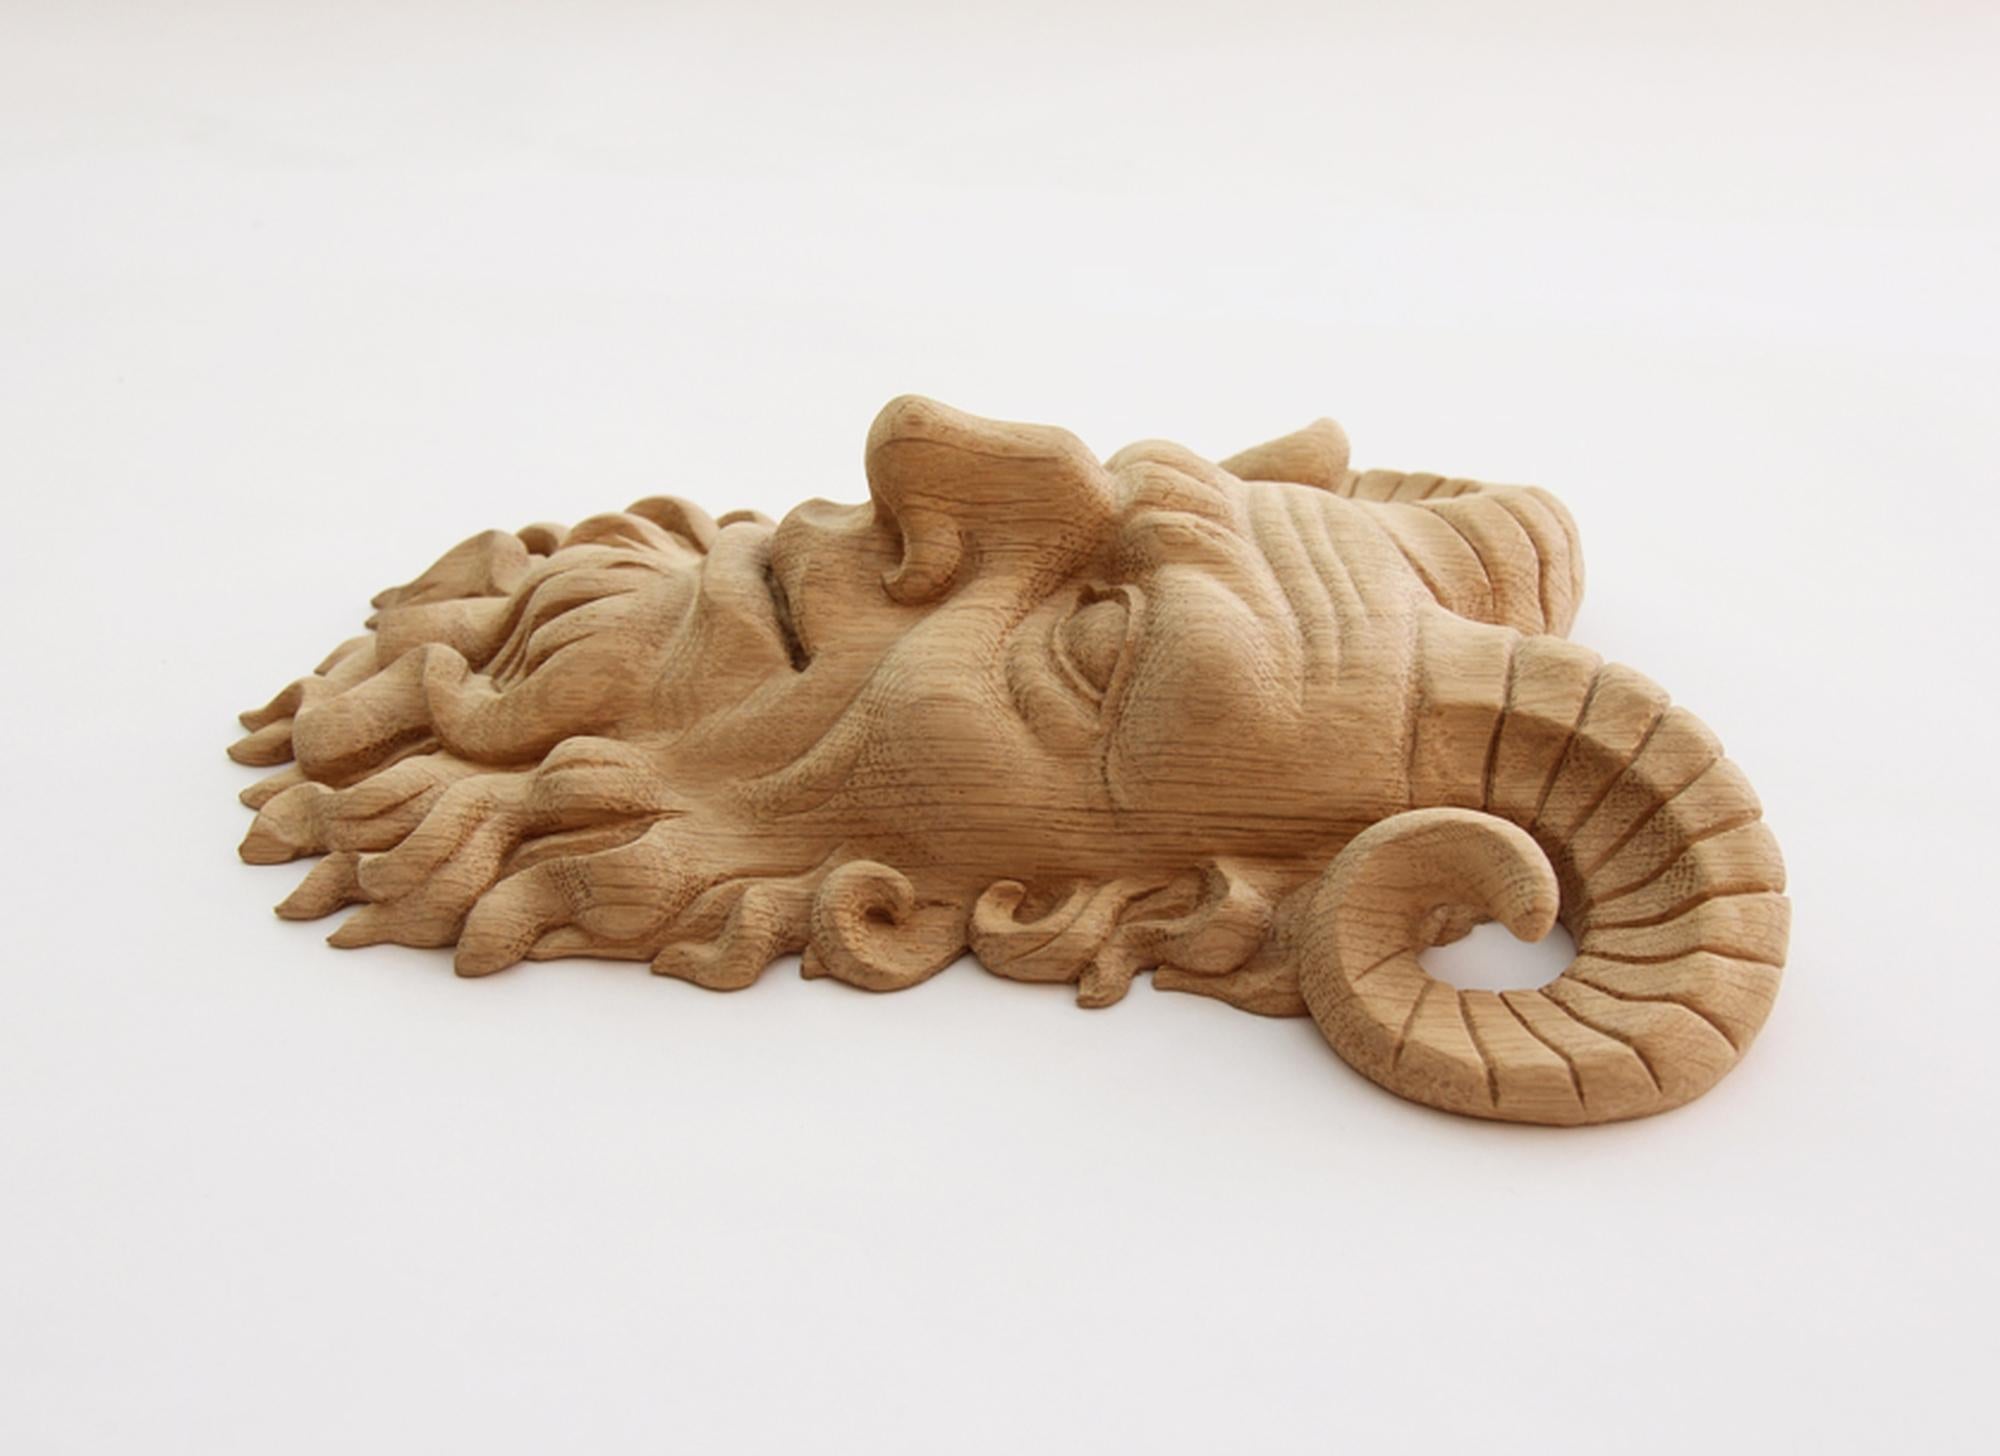 High quality carved mask from oak or beech of your choice.

>> SKU: M-011

>> Dimensions (A x B x C):

1) 5.16